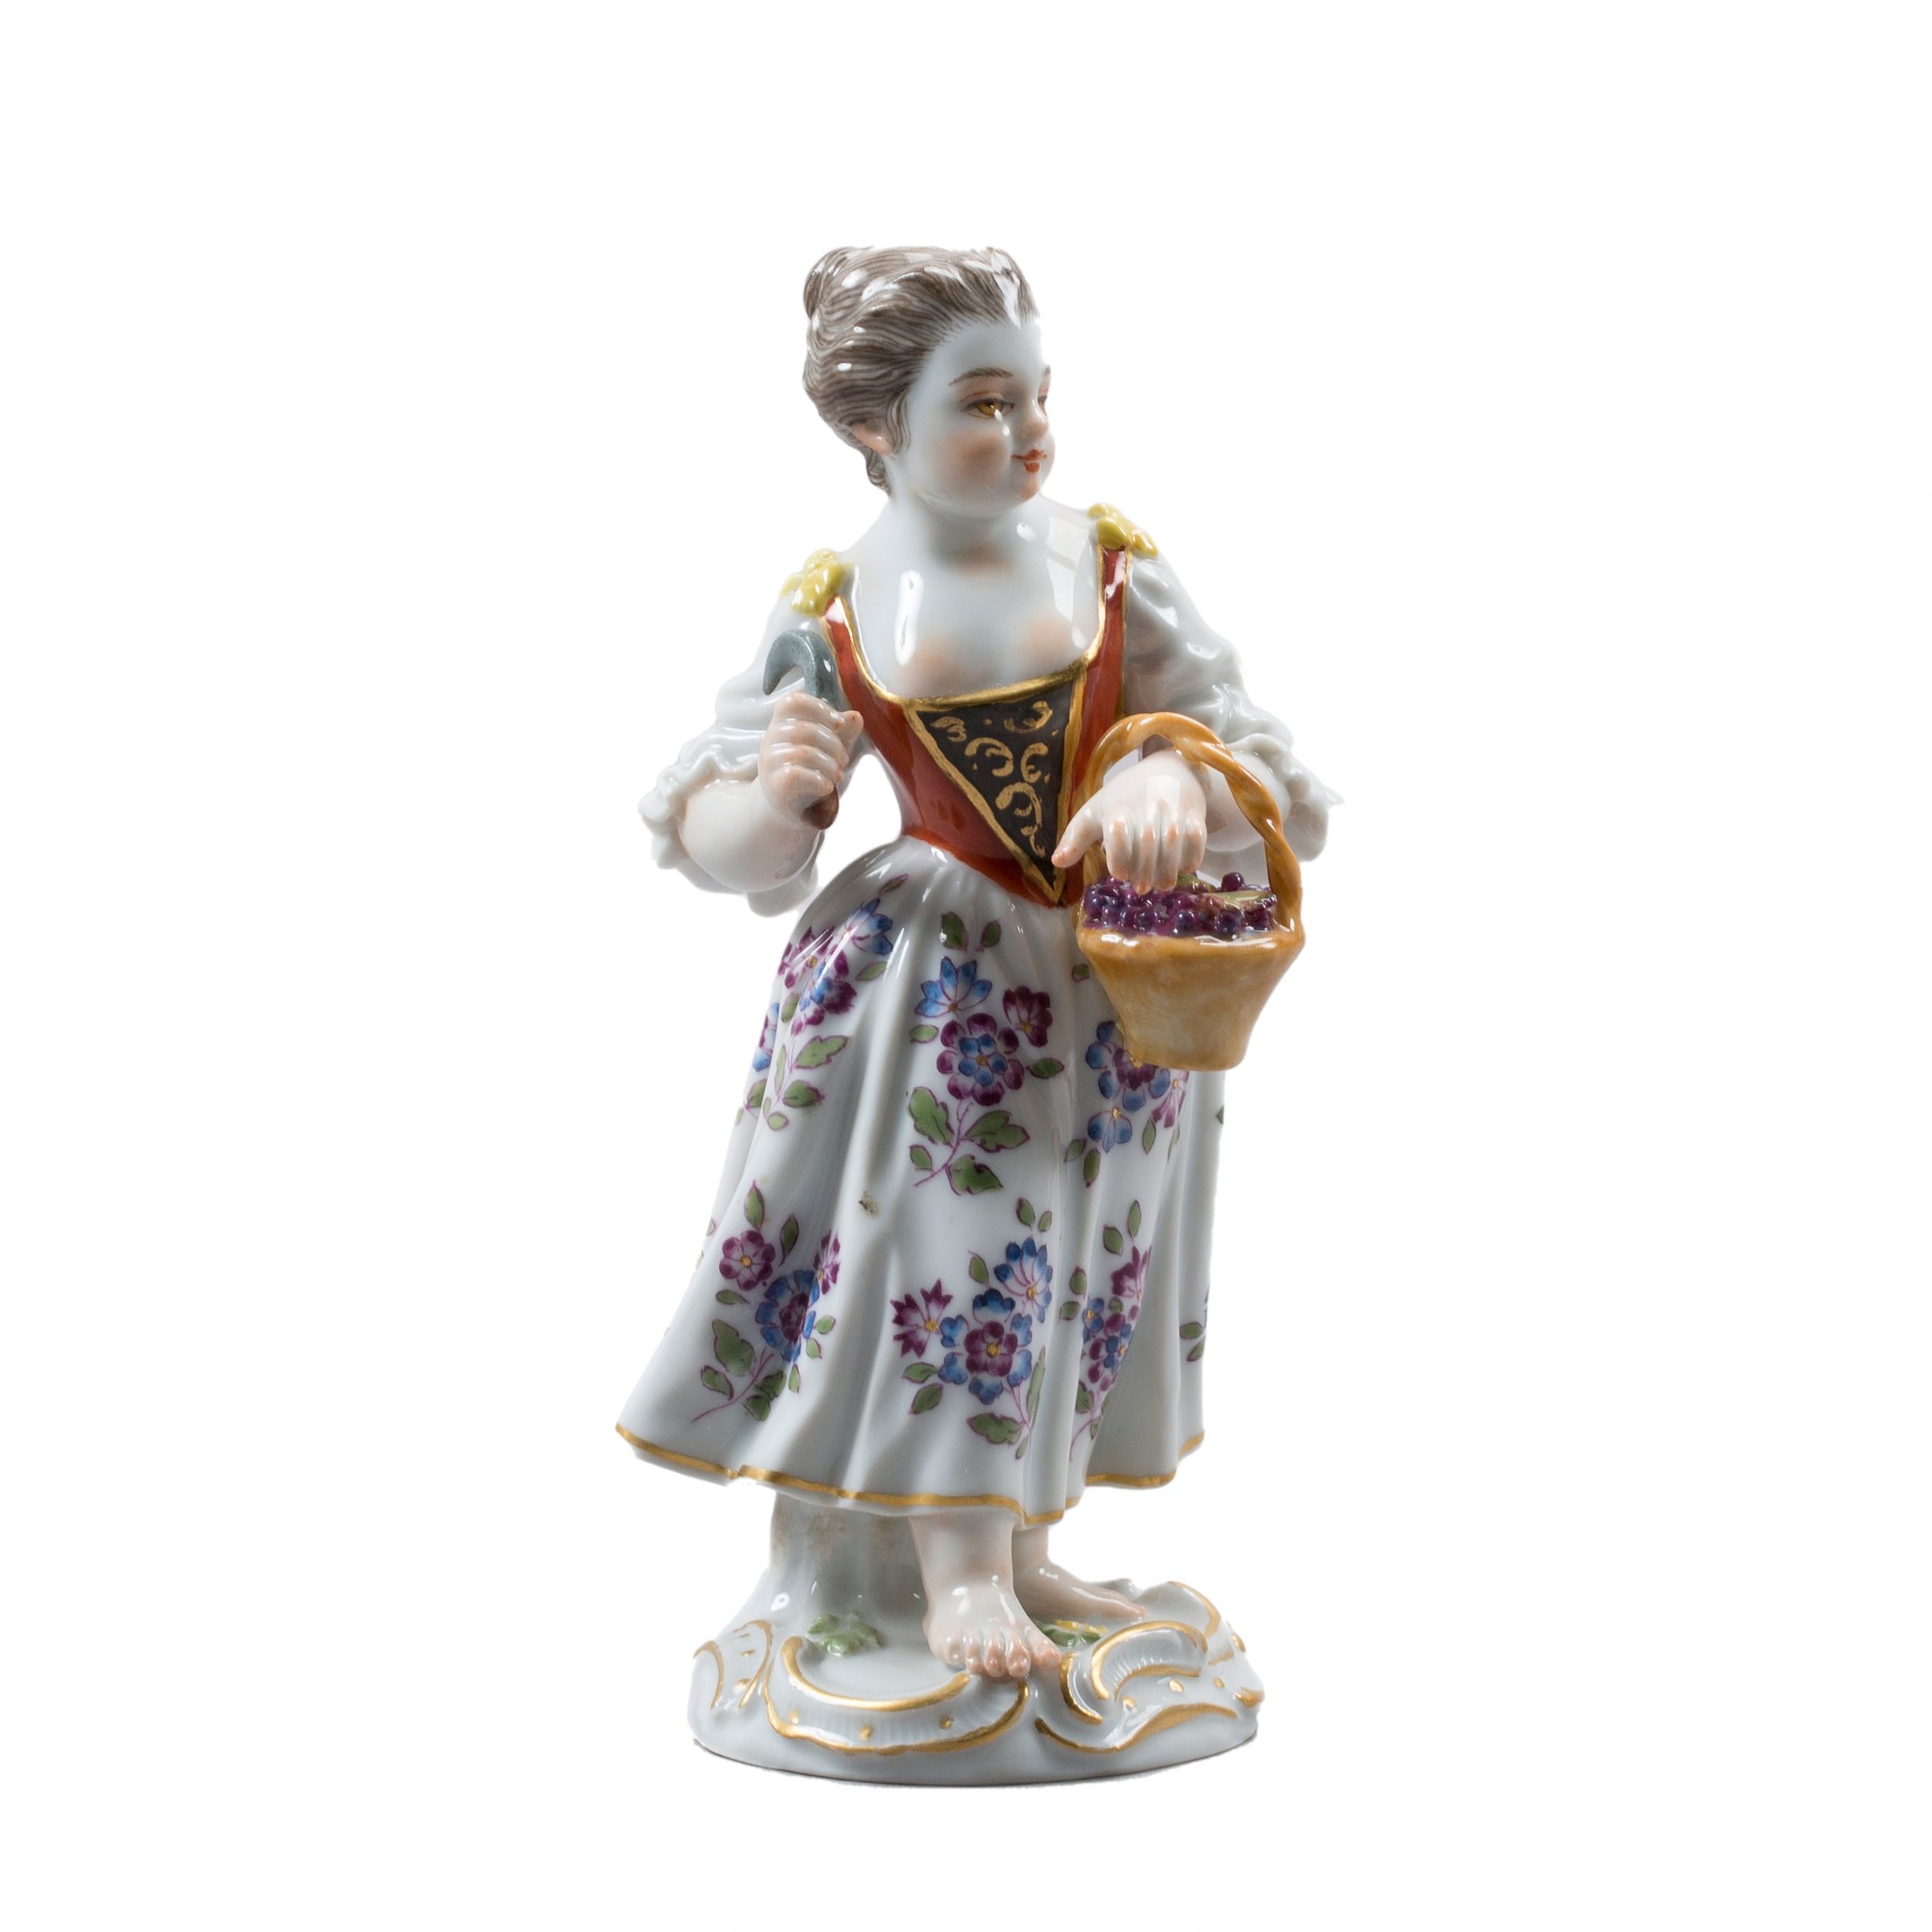 Girl-with-a-basket-Meissen